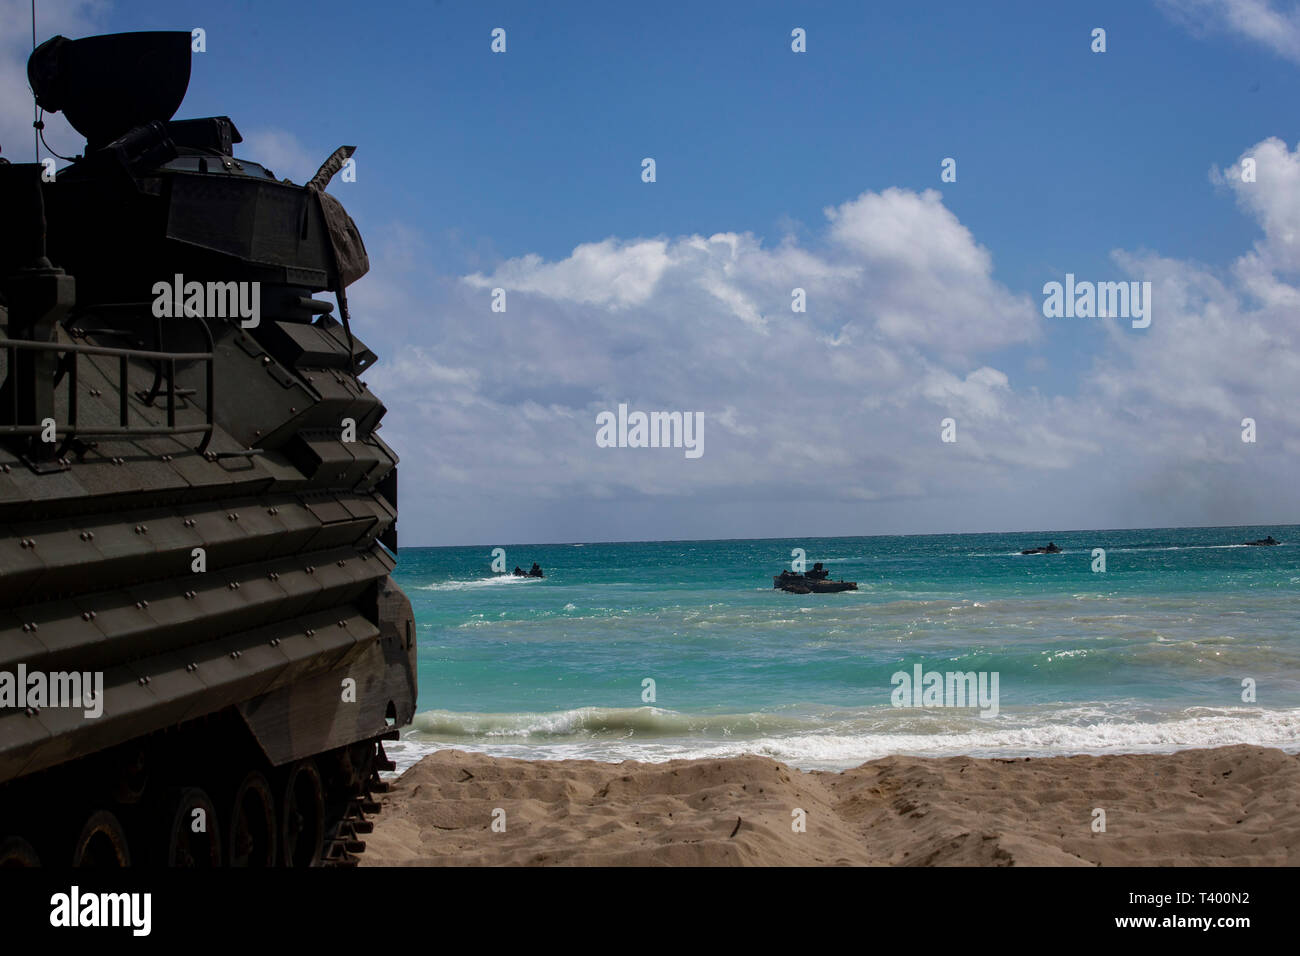 A U.S. Marine Corps amphibious assault vehicle assigned to Combat Assault Company, 3d Marine Regiment, prepares to breach the water during an amphibious assault exercise at Marine Corps Training Area Bellows, Marine Corps Base Hawaii, Apr. 9, 2019. The unit conducted a simulated beach assault to improve their lethality and cooperation, as a mechanized unit and force in readiness. (U.S. Marine Corps photo by Sgt. Alex Kouns) Stock Photo